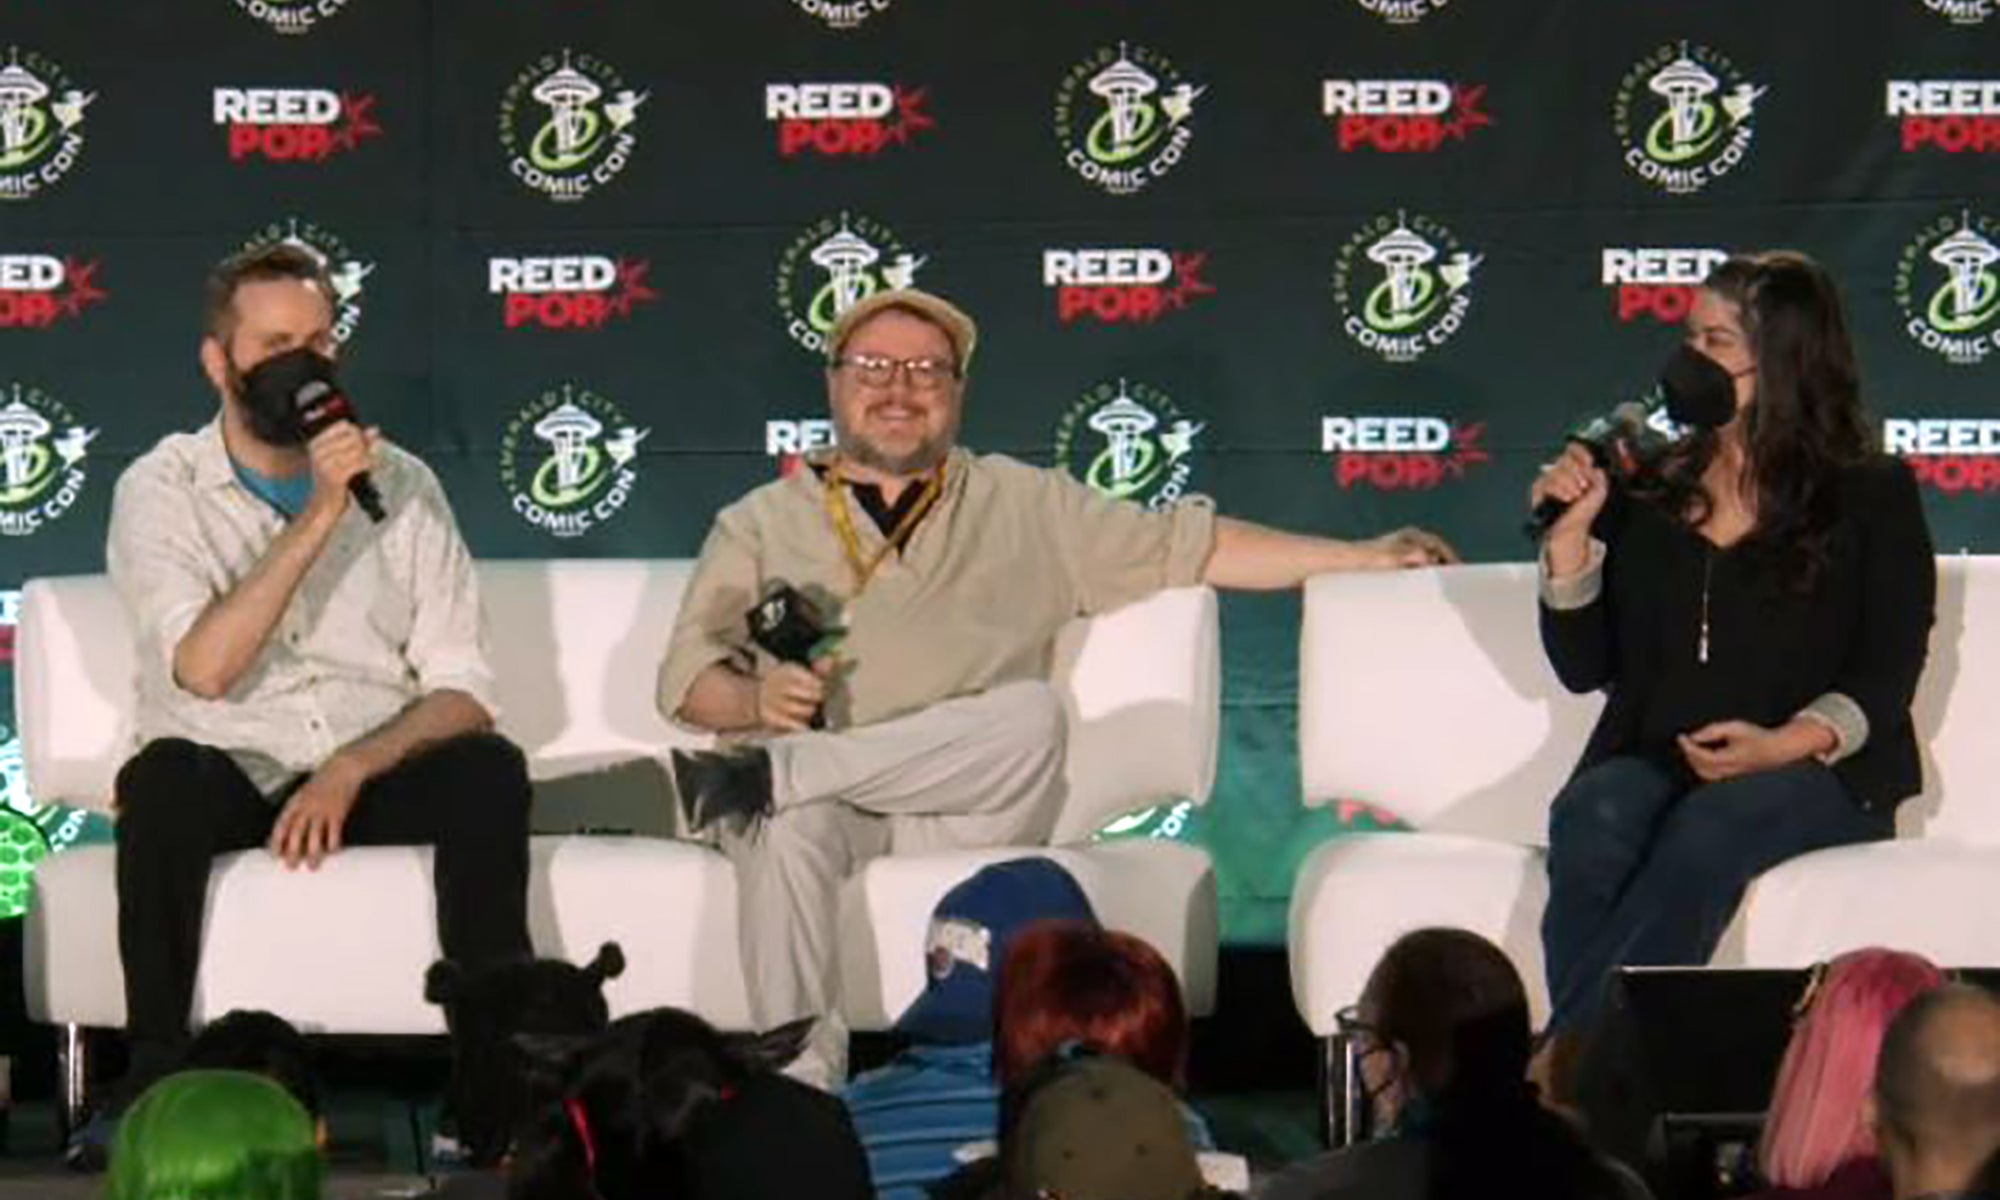 Image for Watch live the One Piece reunion panel with Colleen Clinkenbeard, Ian Sinclair, Sonny Strait at ECCC!